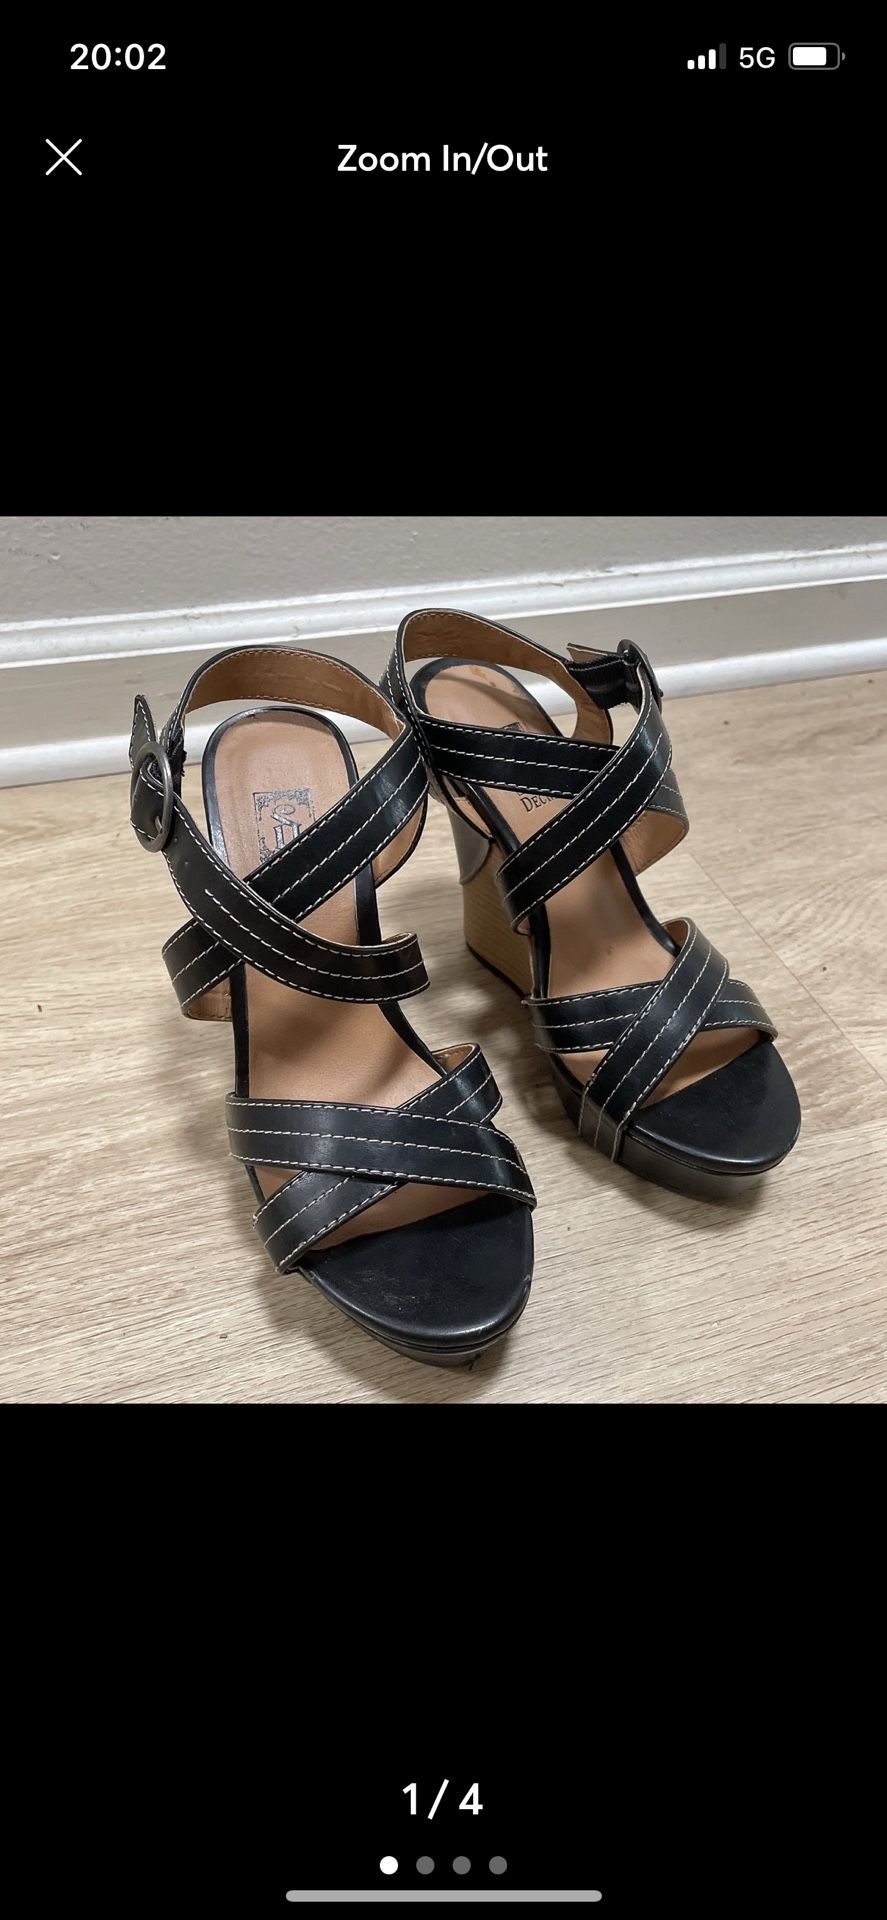 Decree Shoes Strappy Wedge Sandals US7